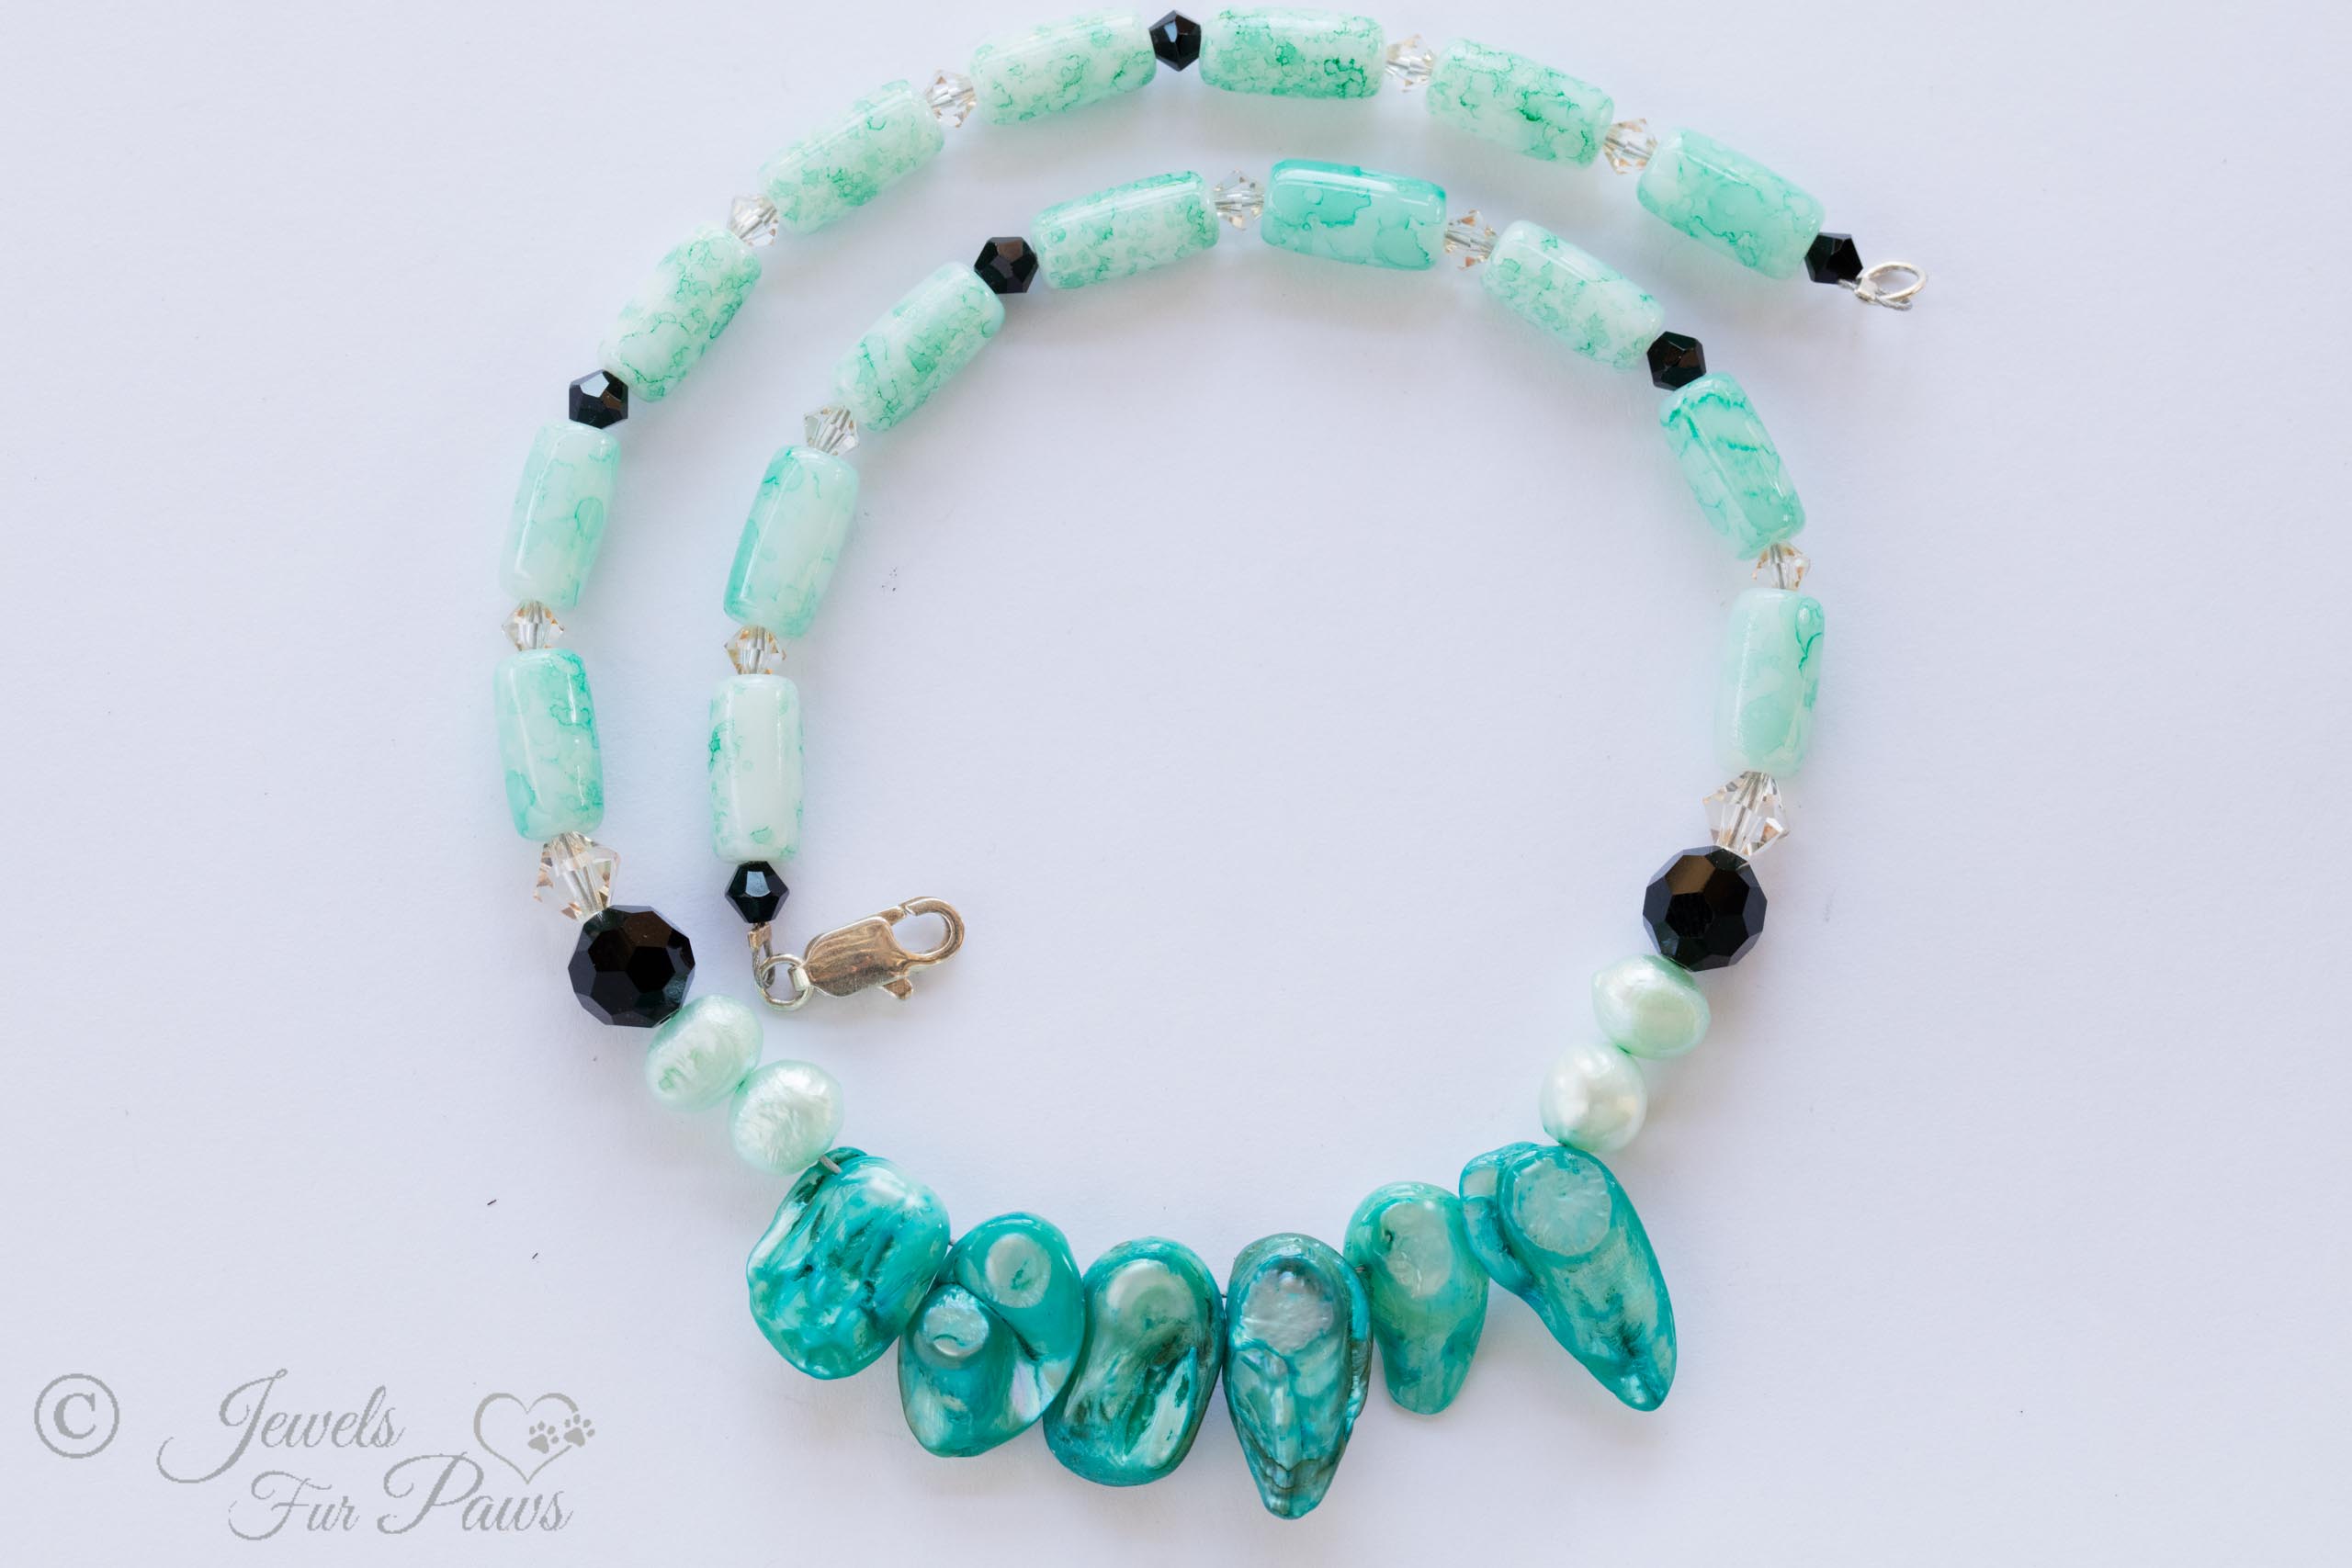 aqua marbleized beads interspersed with black Swarovski crystals complementing five aqua Burmese pearls on a white background